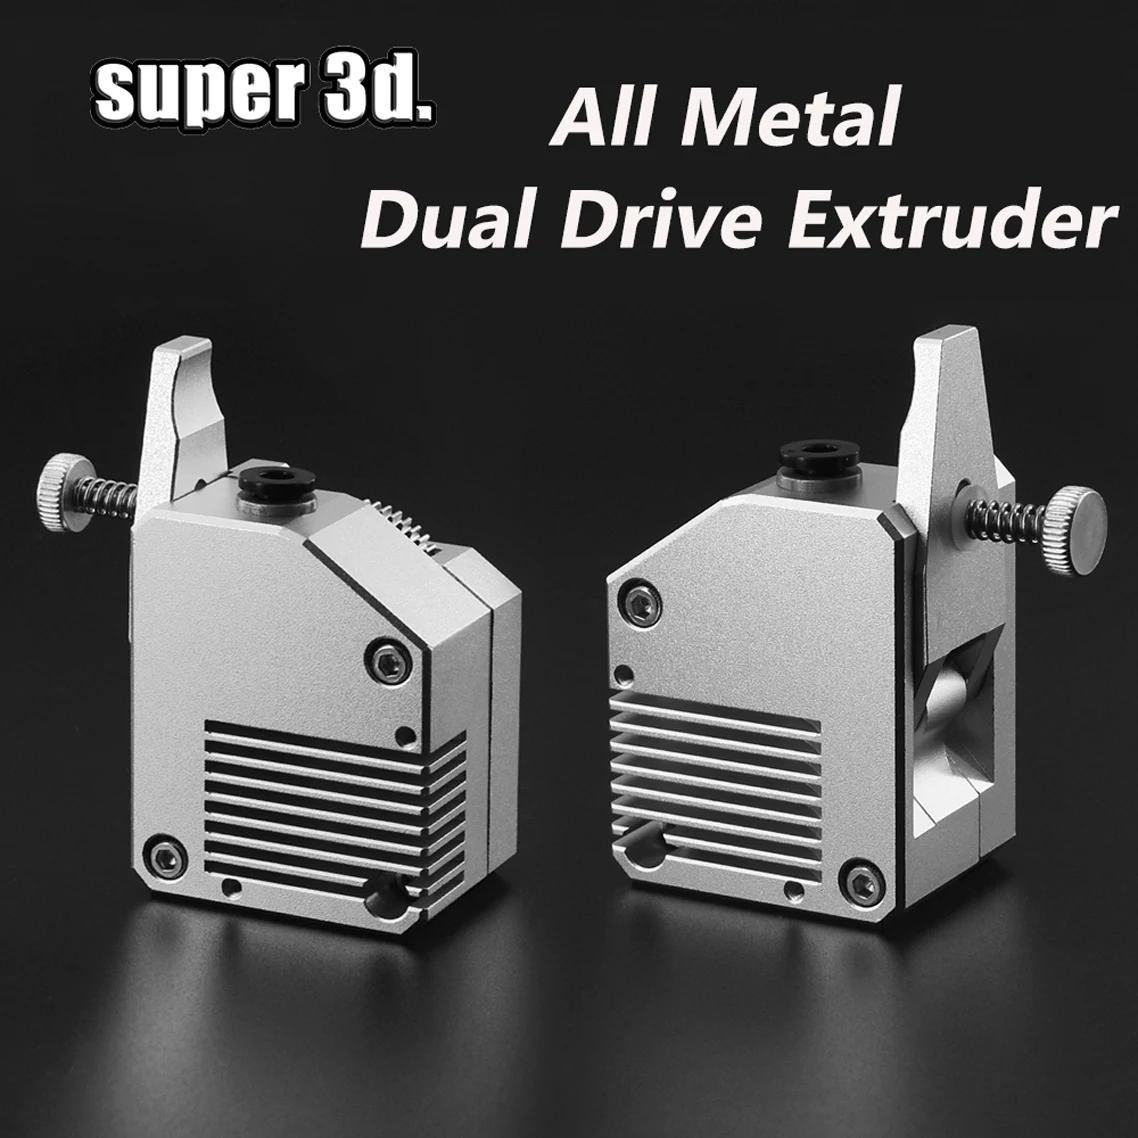 

All Metal Dual Gear Extruder Right/ Left Bowden extrusor For Mk8 CR10 Ender 3/5 Pro Anet a8 E10 Anycubic i3 mega 3d Printer